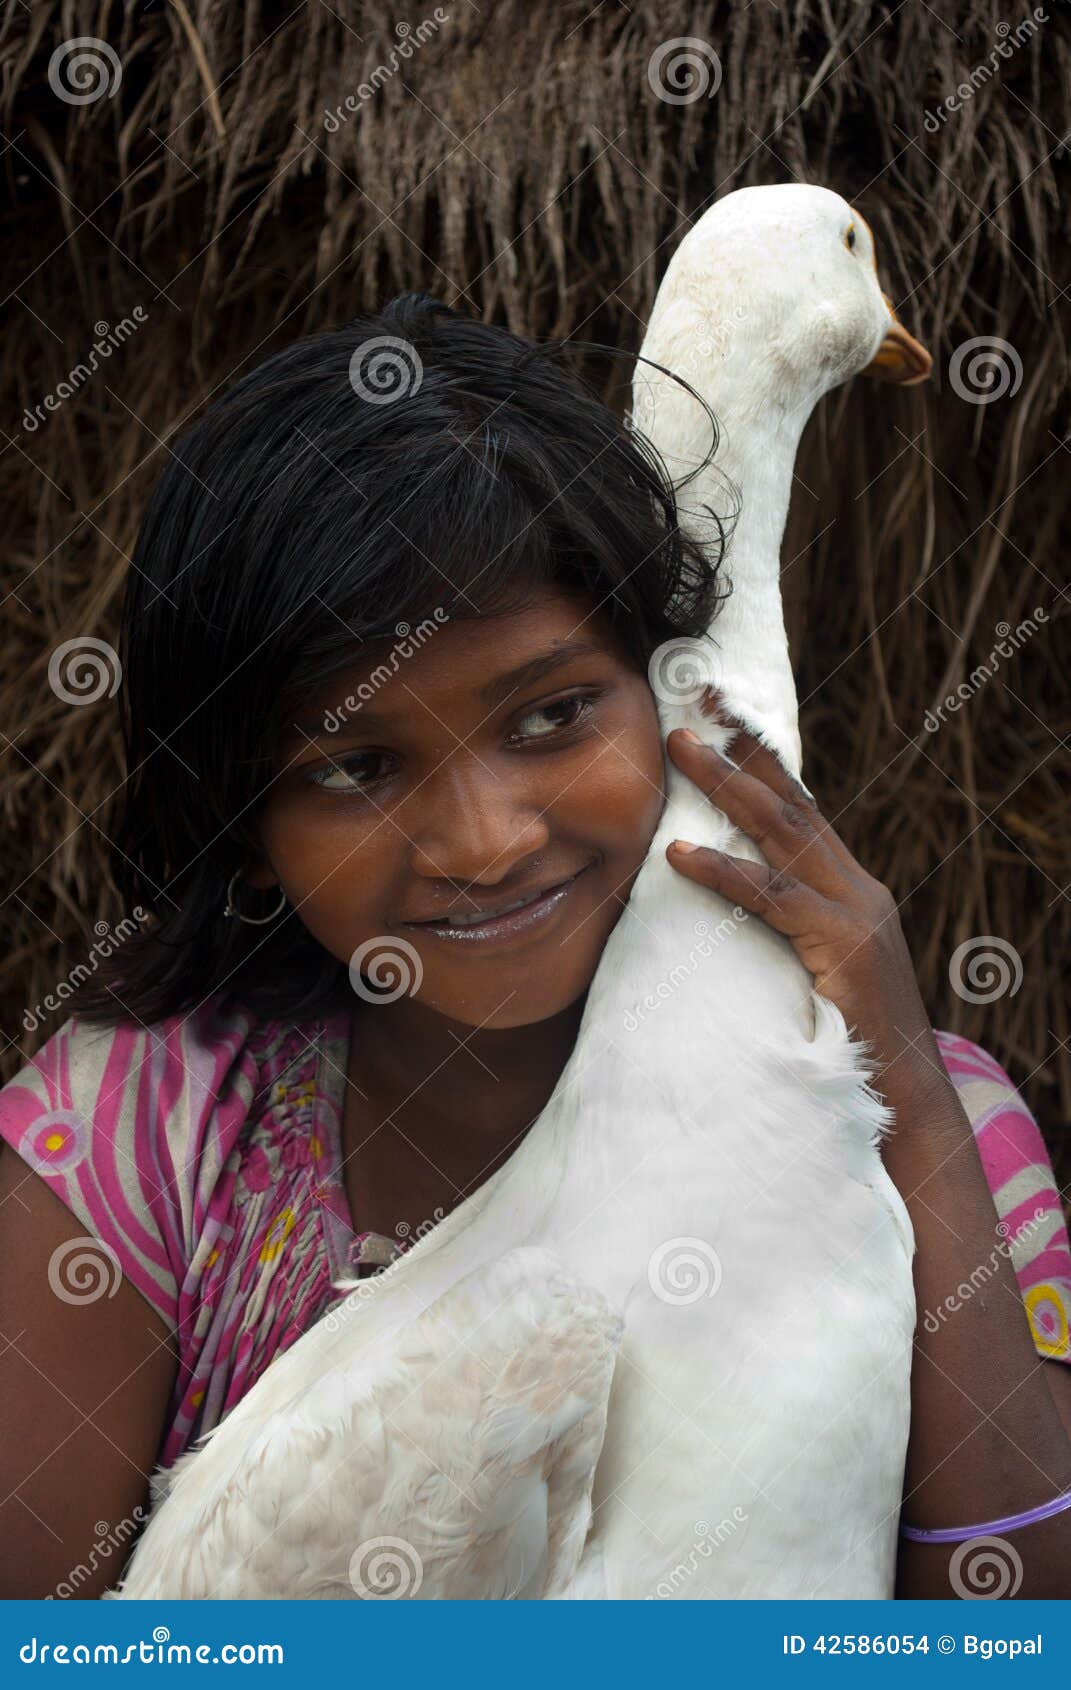 Girl holding a duck editorial stock image. Image of girl - 42586054